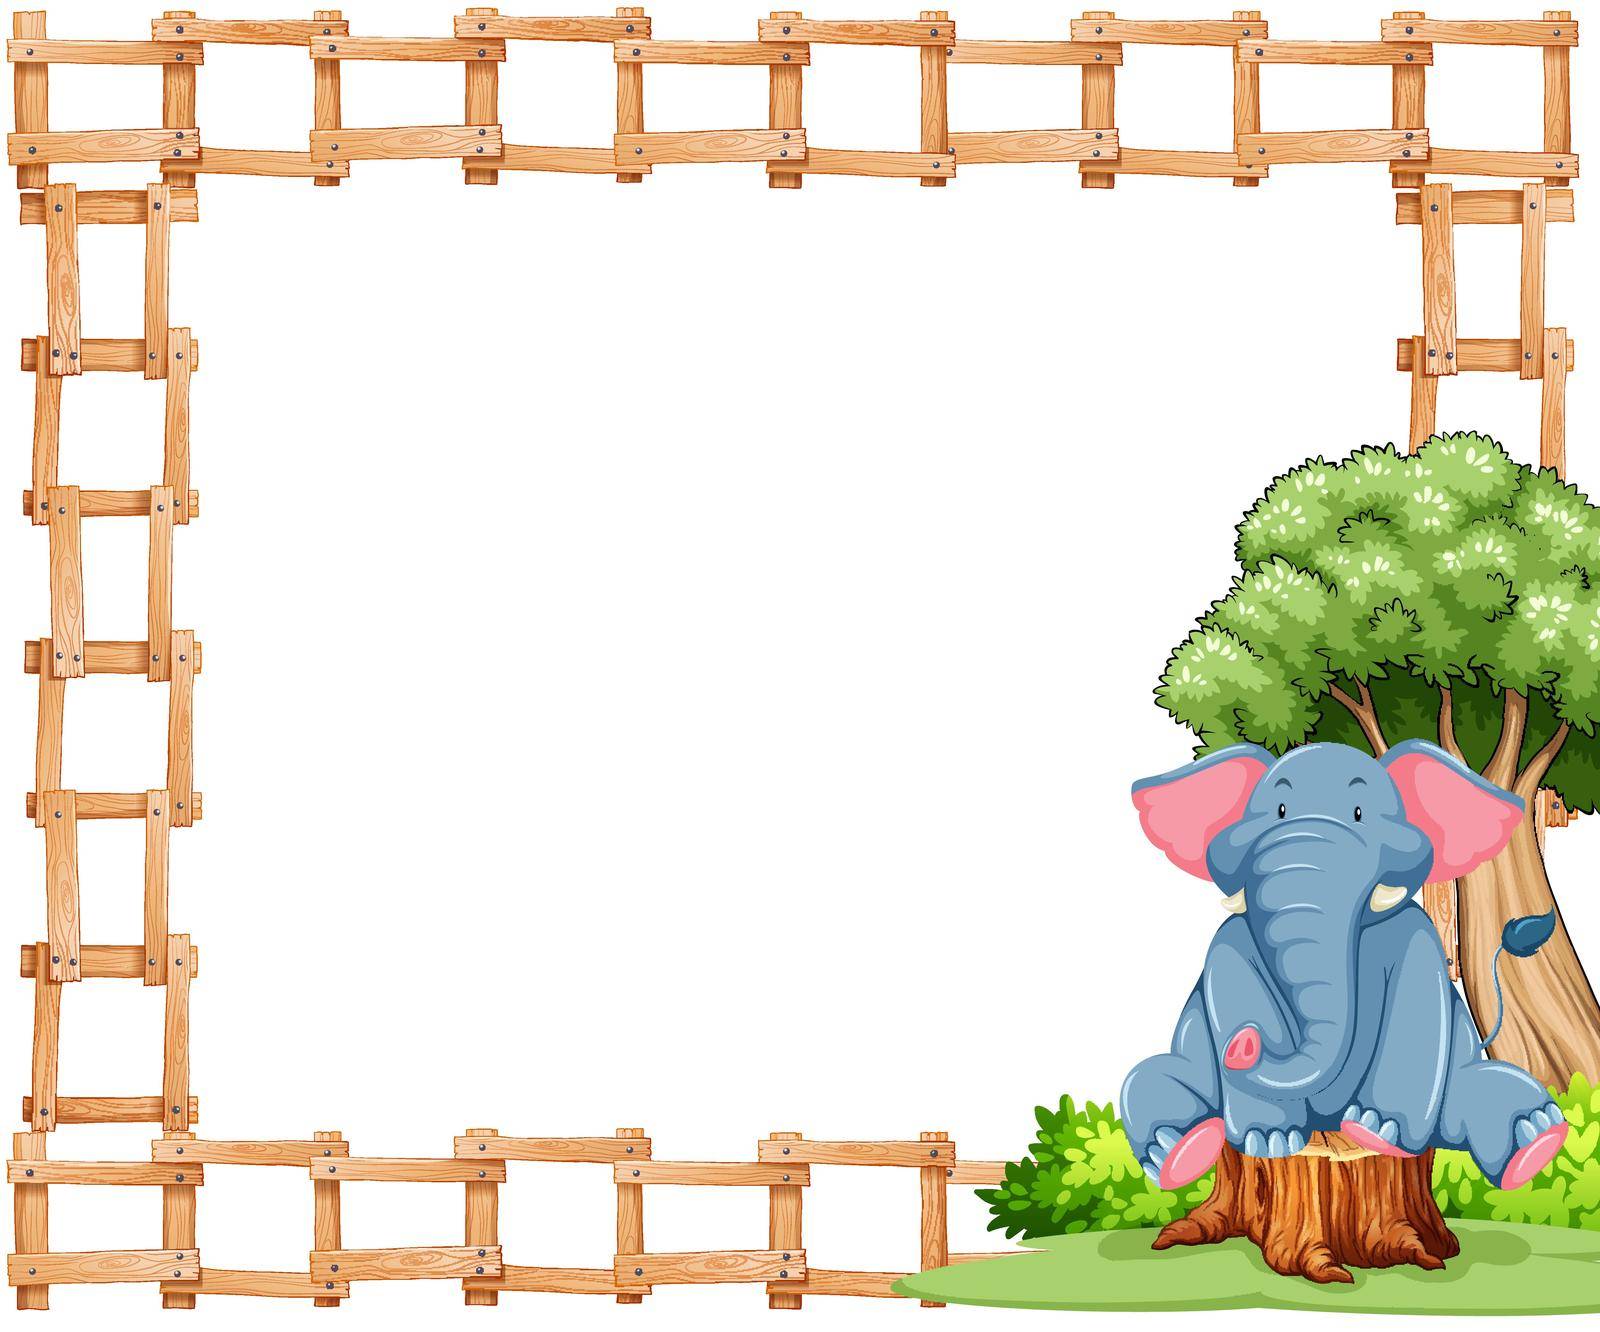 White card with elephant and fence border